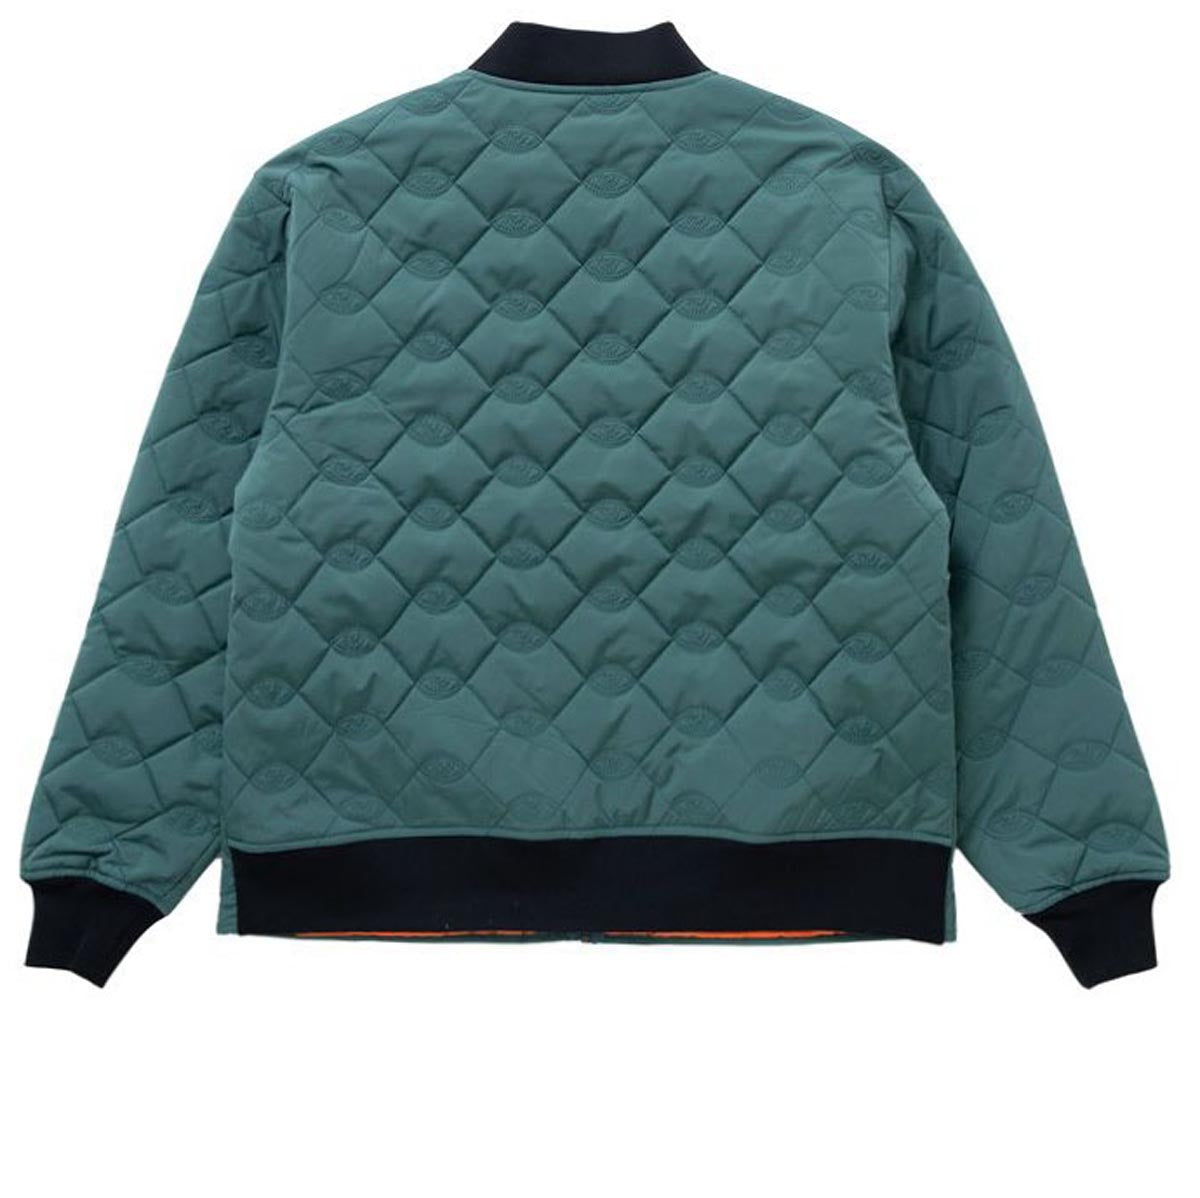 Toy Machine Sect Eye Stitch Quilted Bomber Jacket - Green image 2